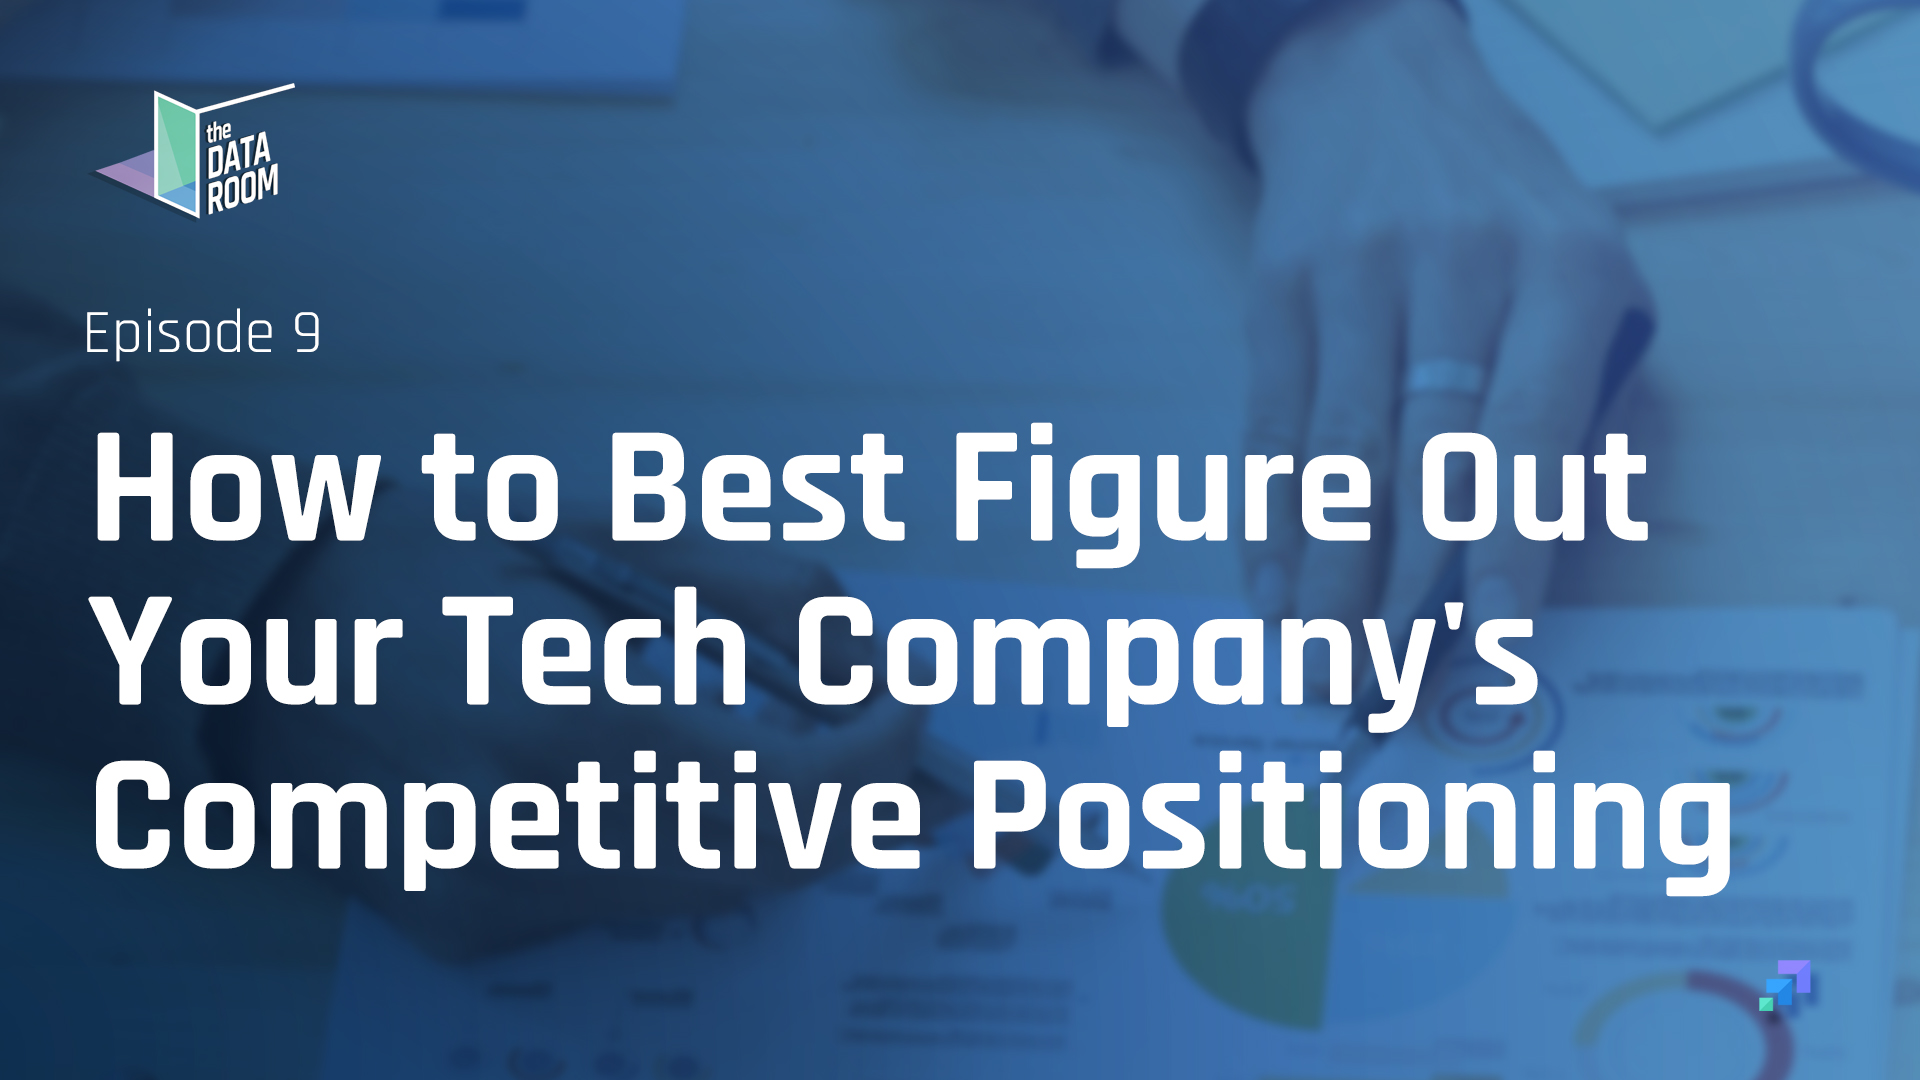 How to Best Figure Out Your Tech Company's Competitive Positioning